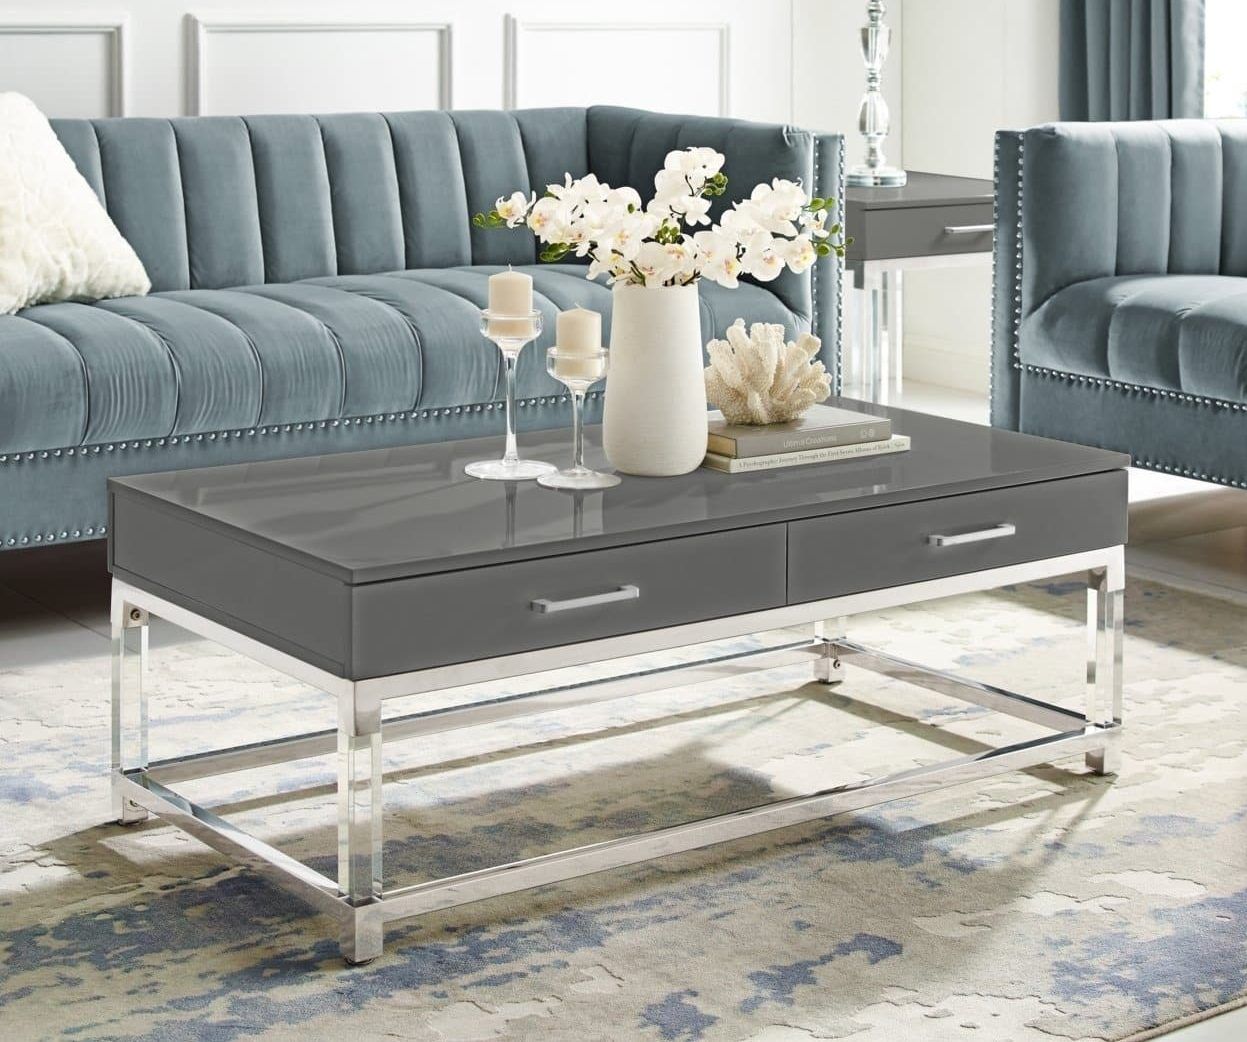 21 Lucite Coffee Tables To Liven Your Living Room – Acrylic & See Through Within Thick Acrylic Coffee Tables (View 7 of 20)